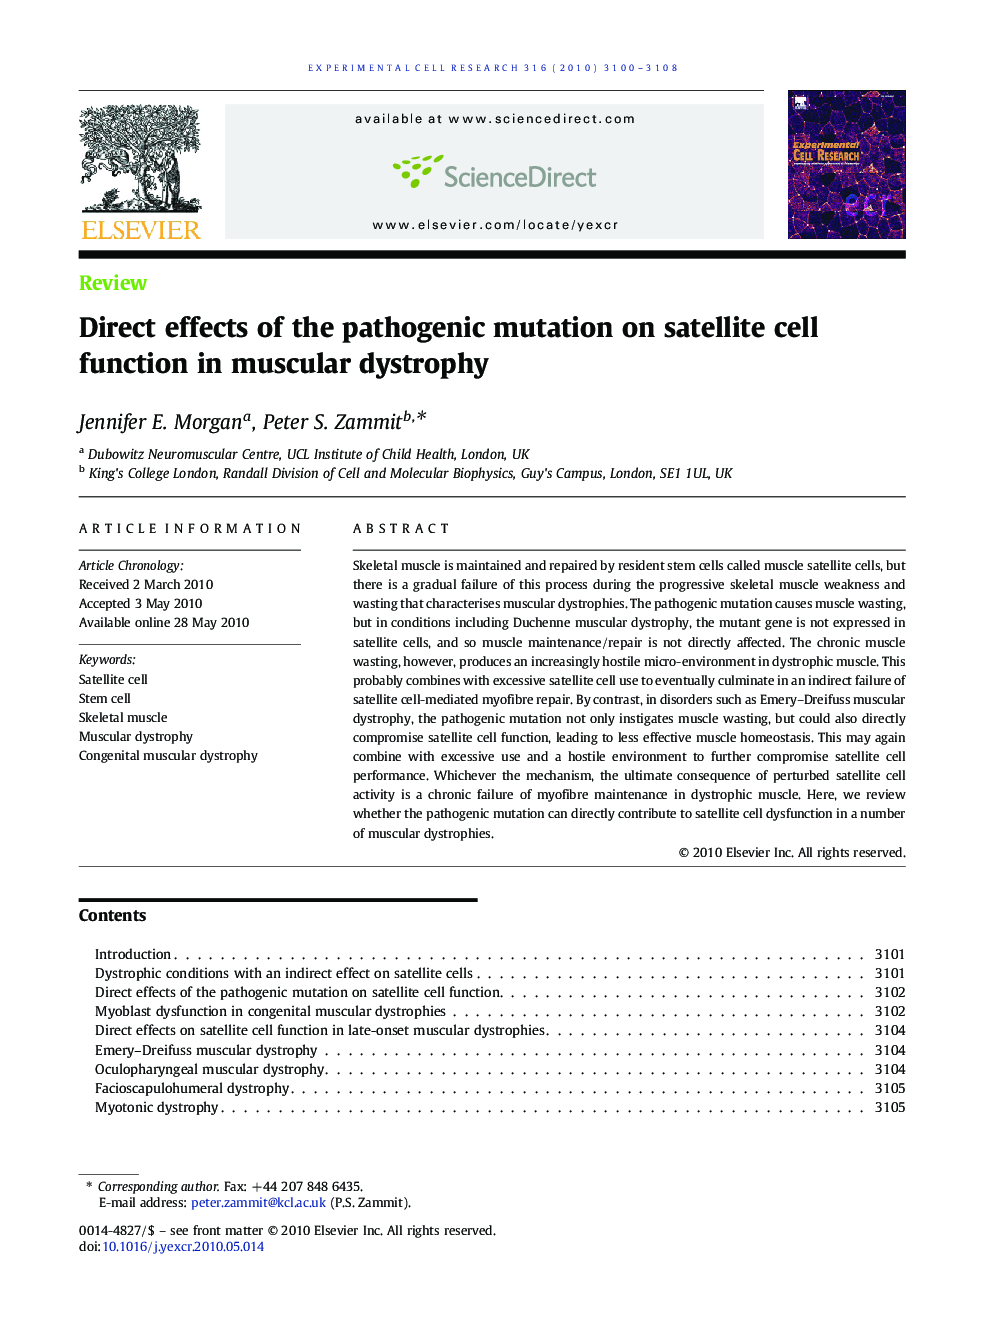 Direct effects of the pathogenic mutation on satellite cell function in muscular dystrophy